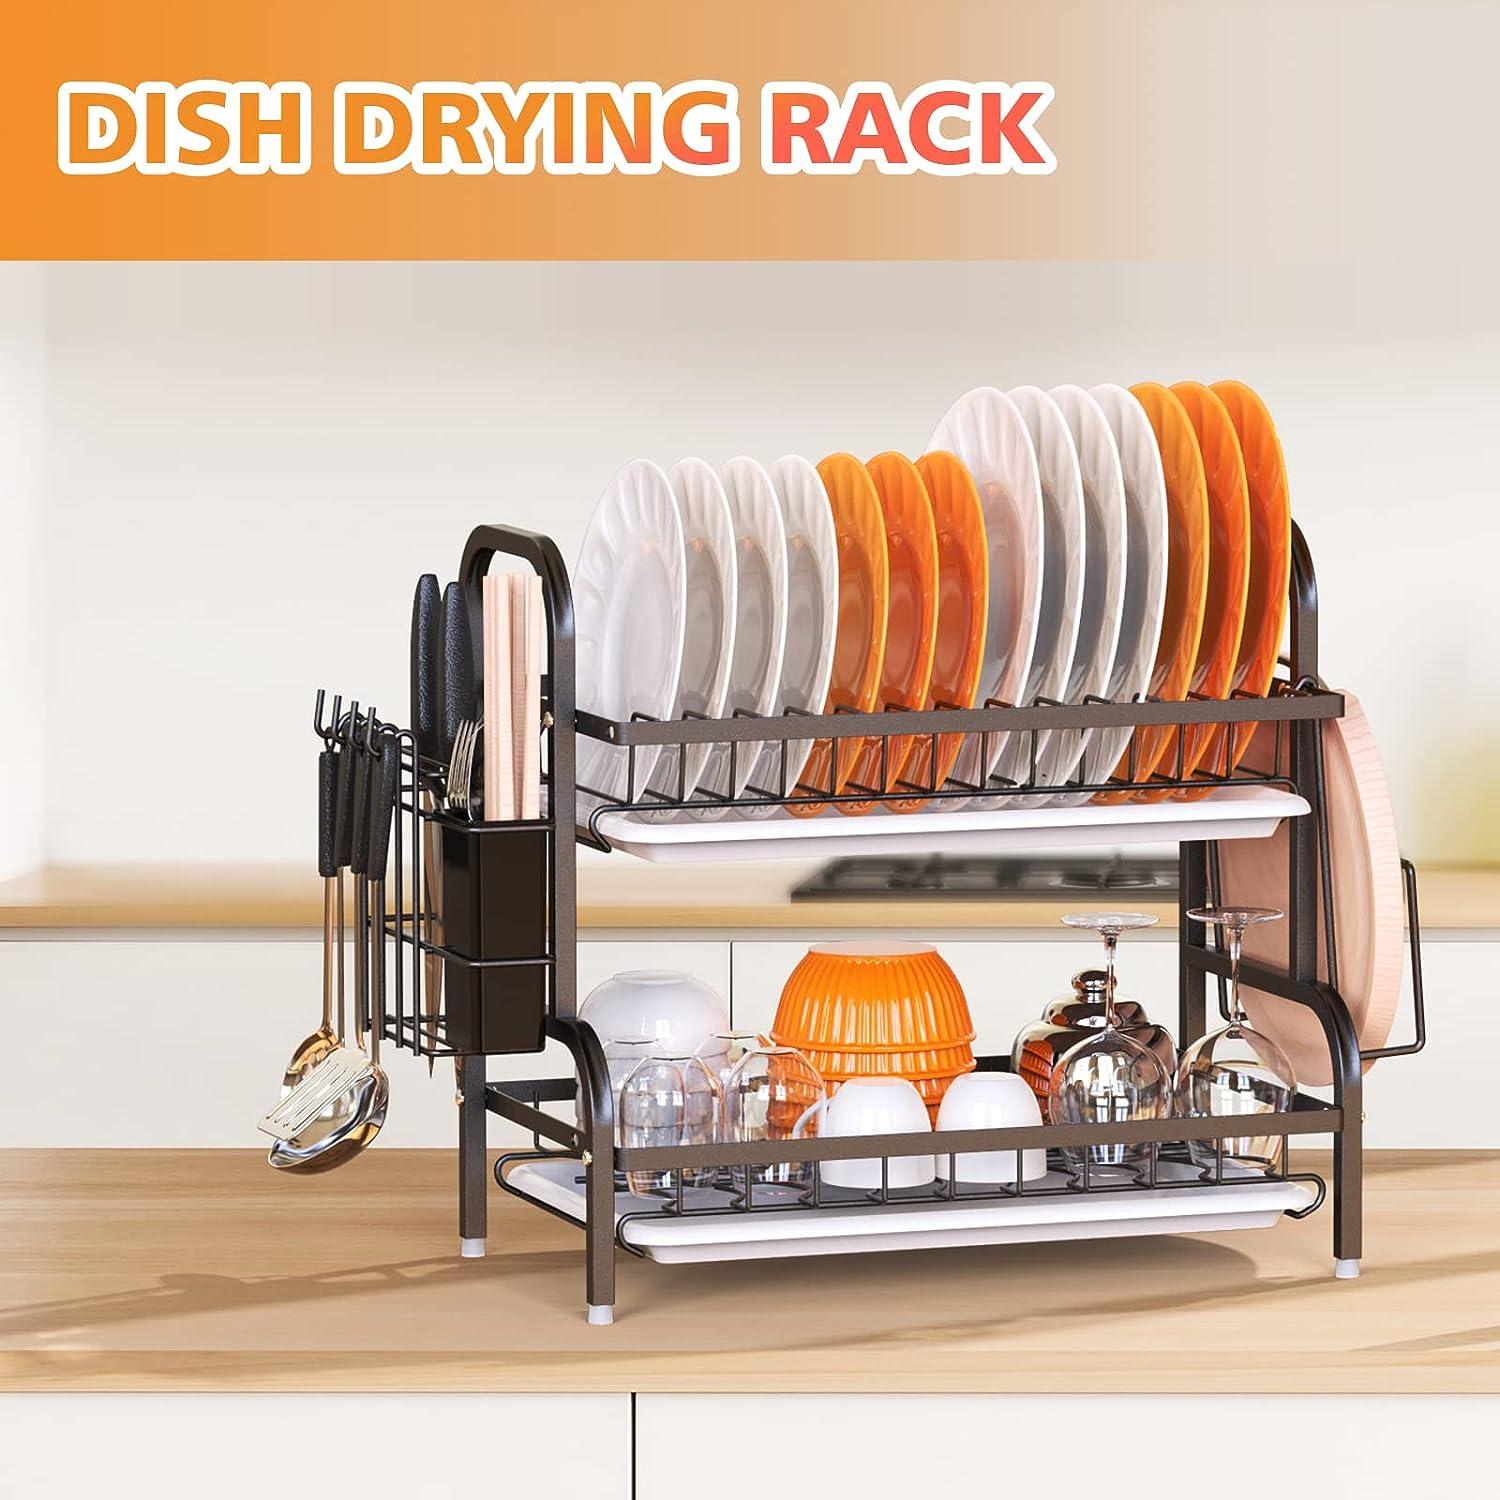 Dish Drying Rack, 2-Tier Dish Racks For Kitchen Counter, Sink Dish Drainer With Drainboard, Utensil Holder And Cutting Board Holder, Stainless Steel Kitchen Drying Rack-Black - Nioor